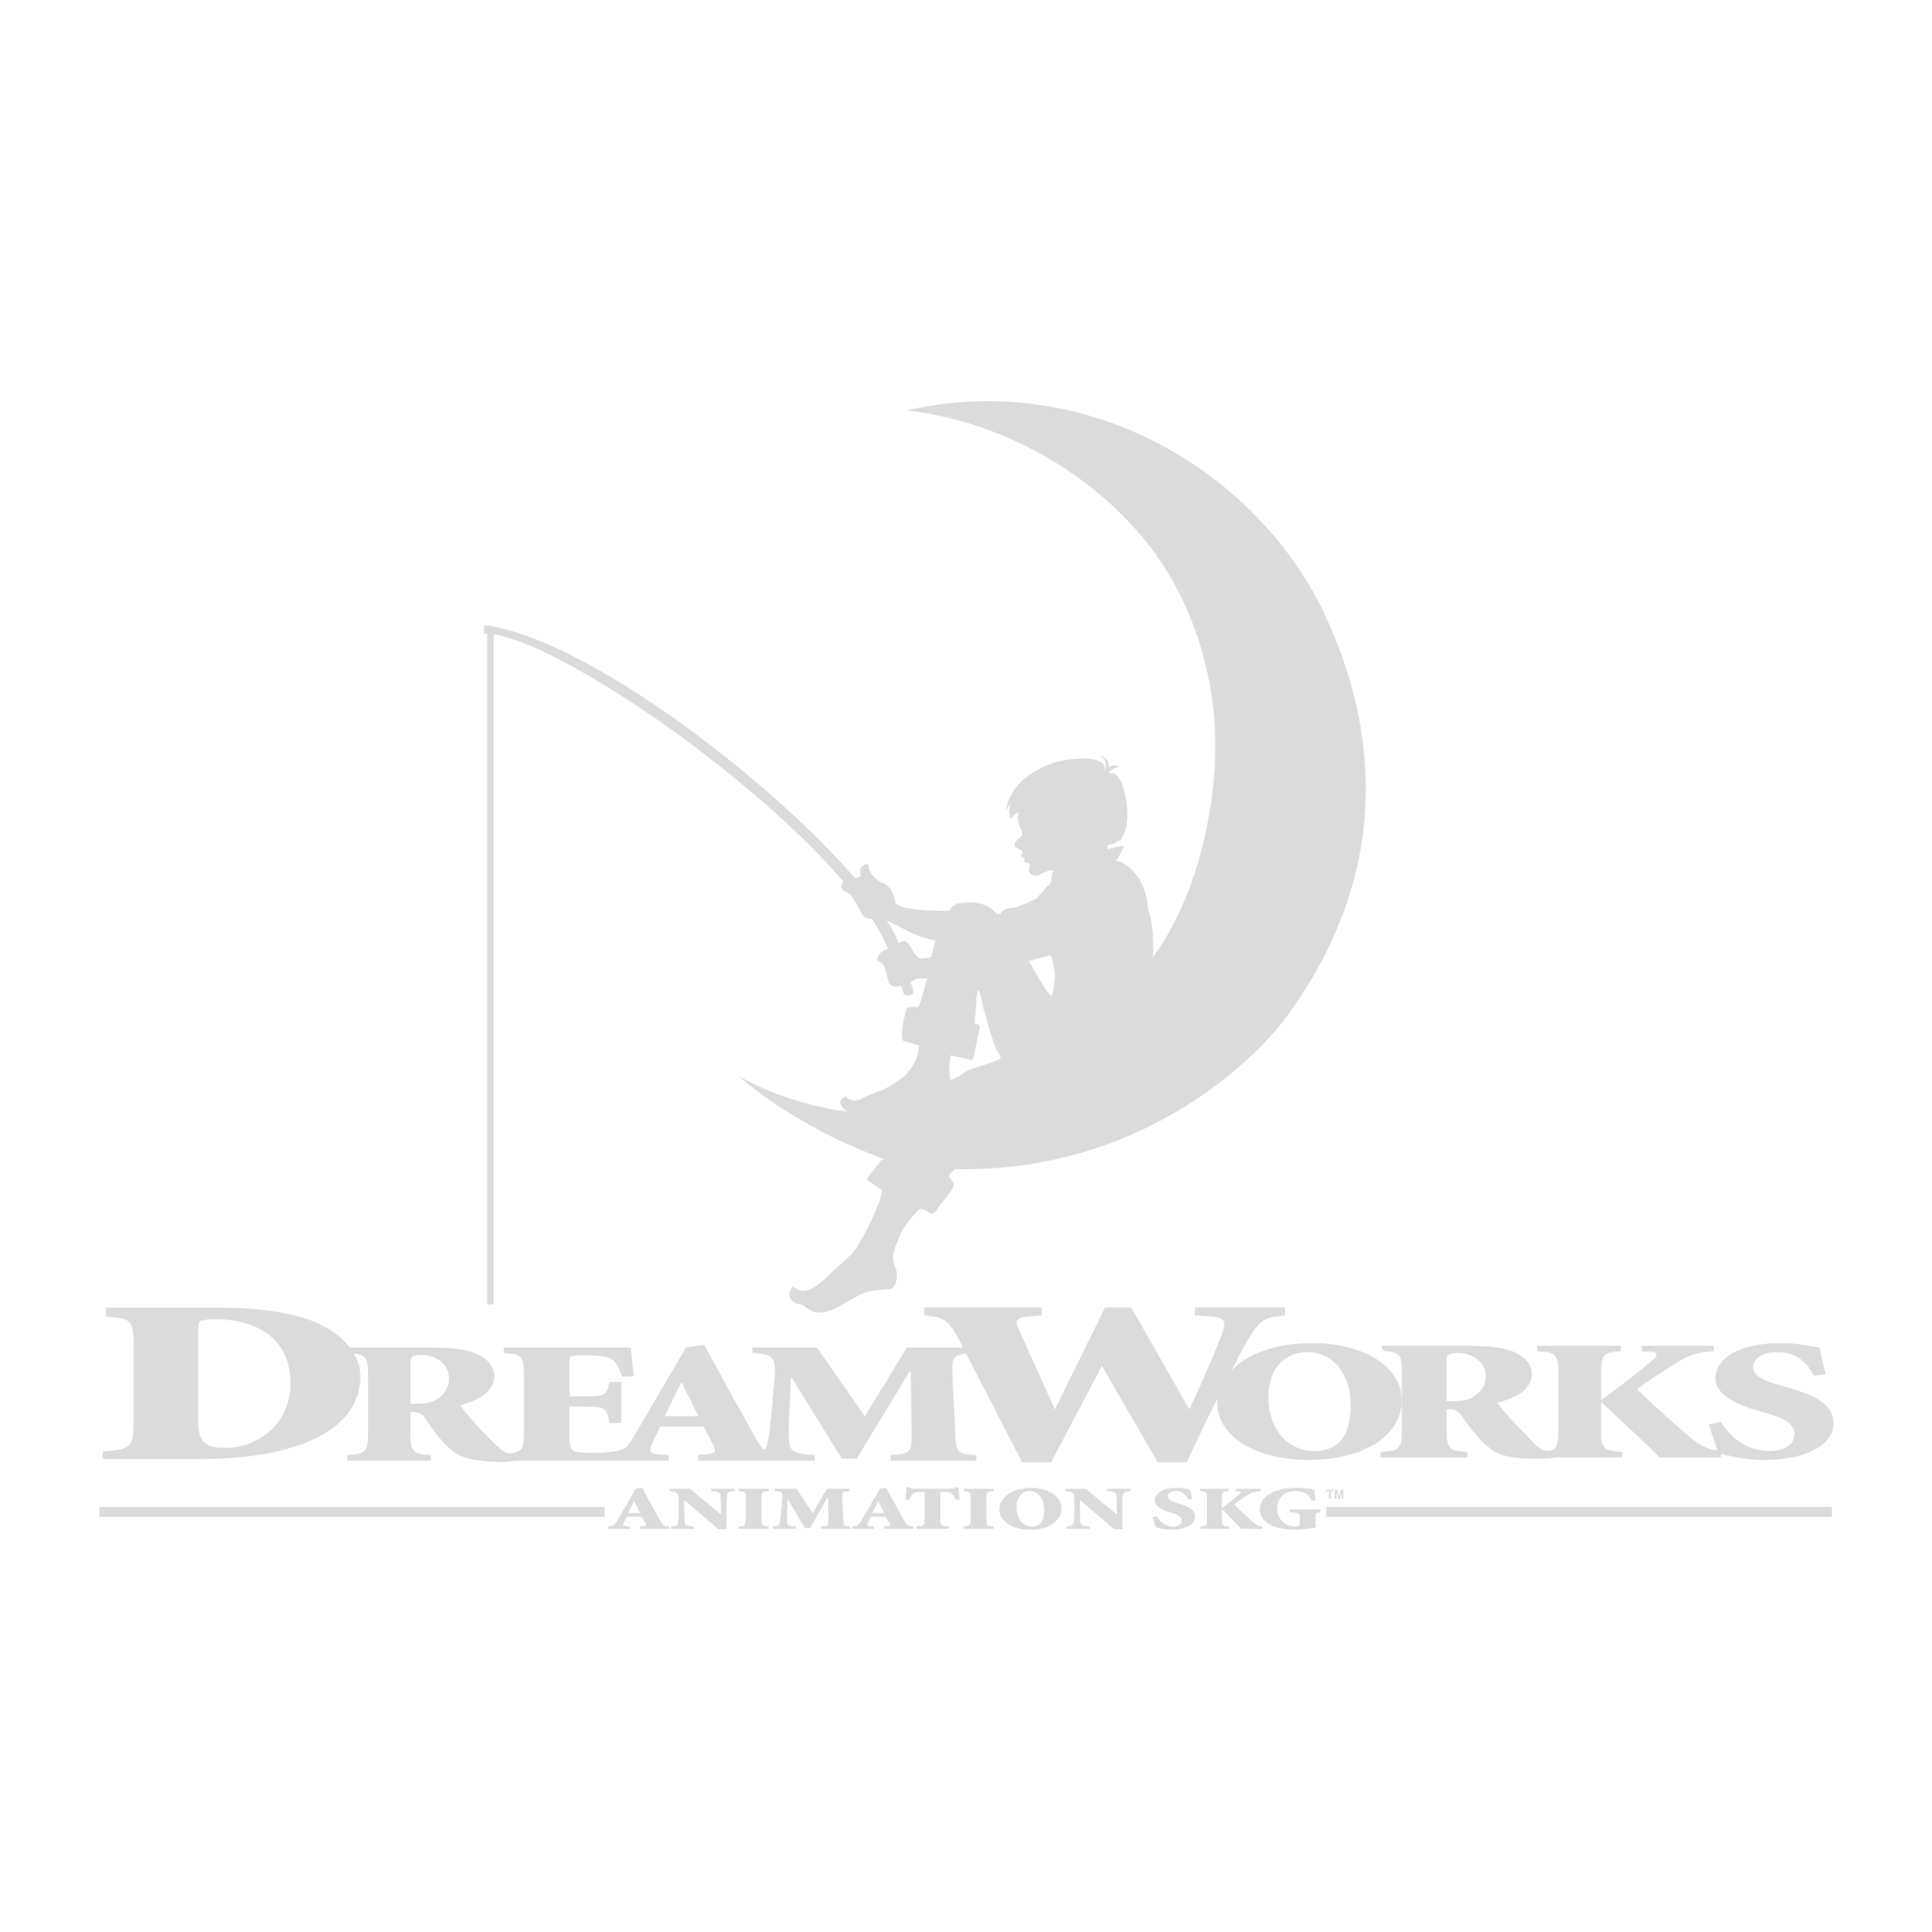 DREAMWORKS_GRAY.png